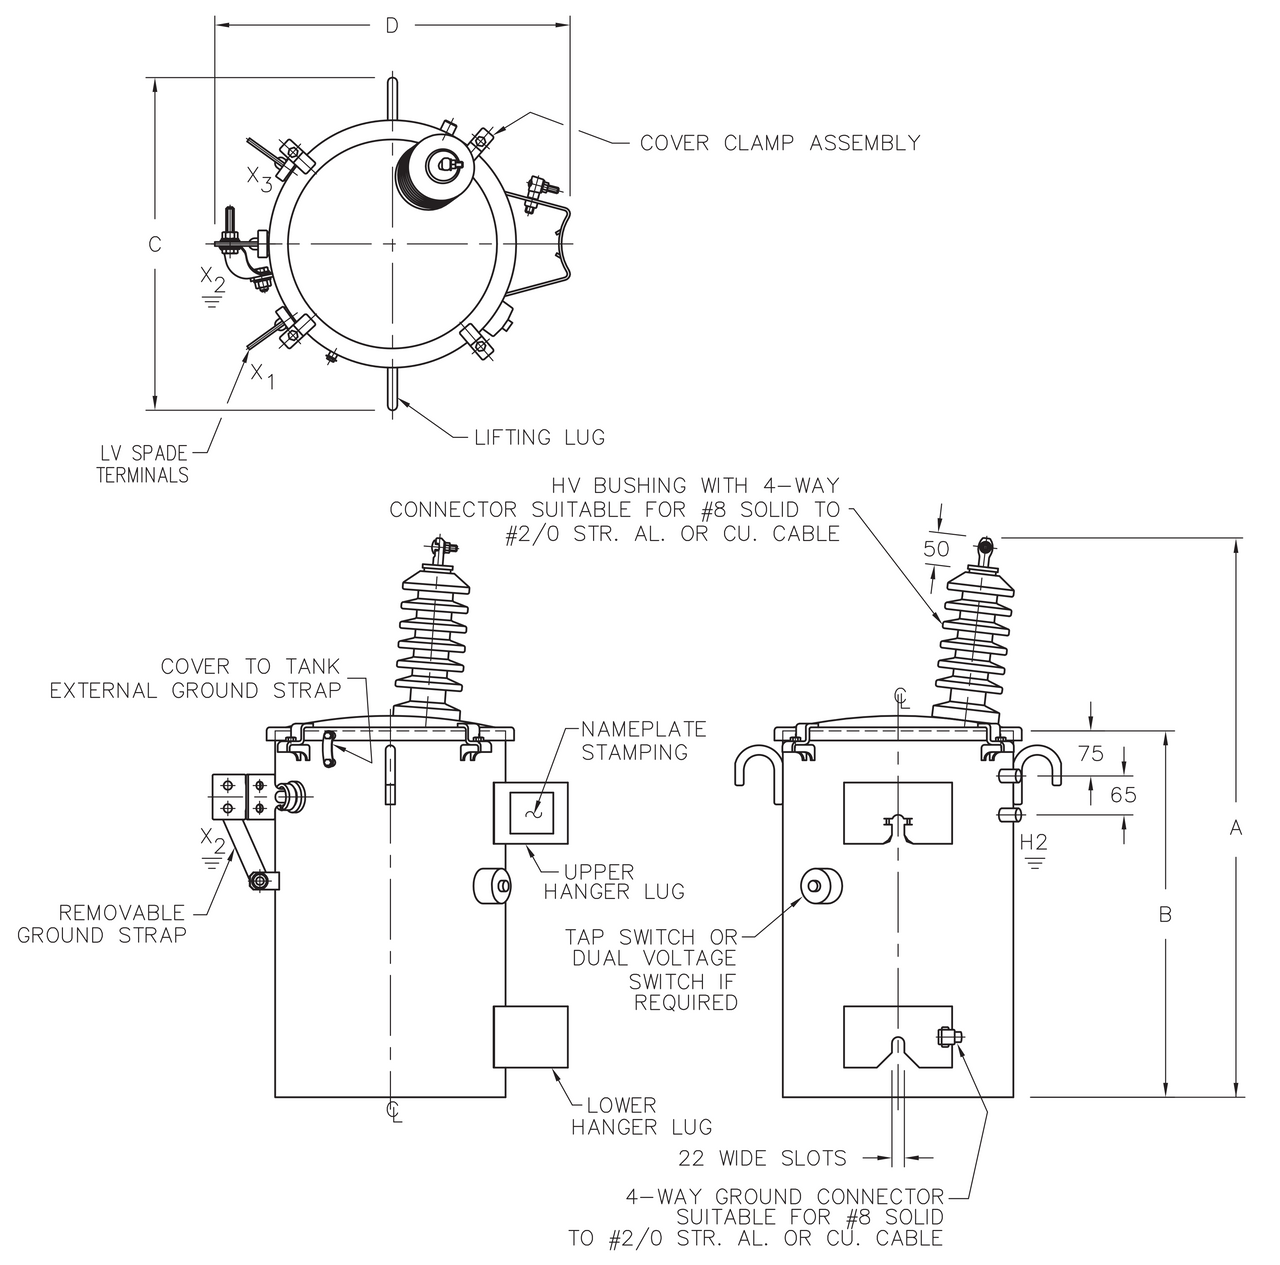 Technical drawing of the outline of a 100 kVA ONAN oil filled transformer